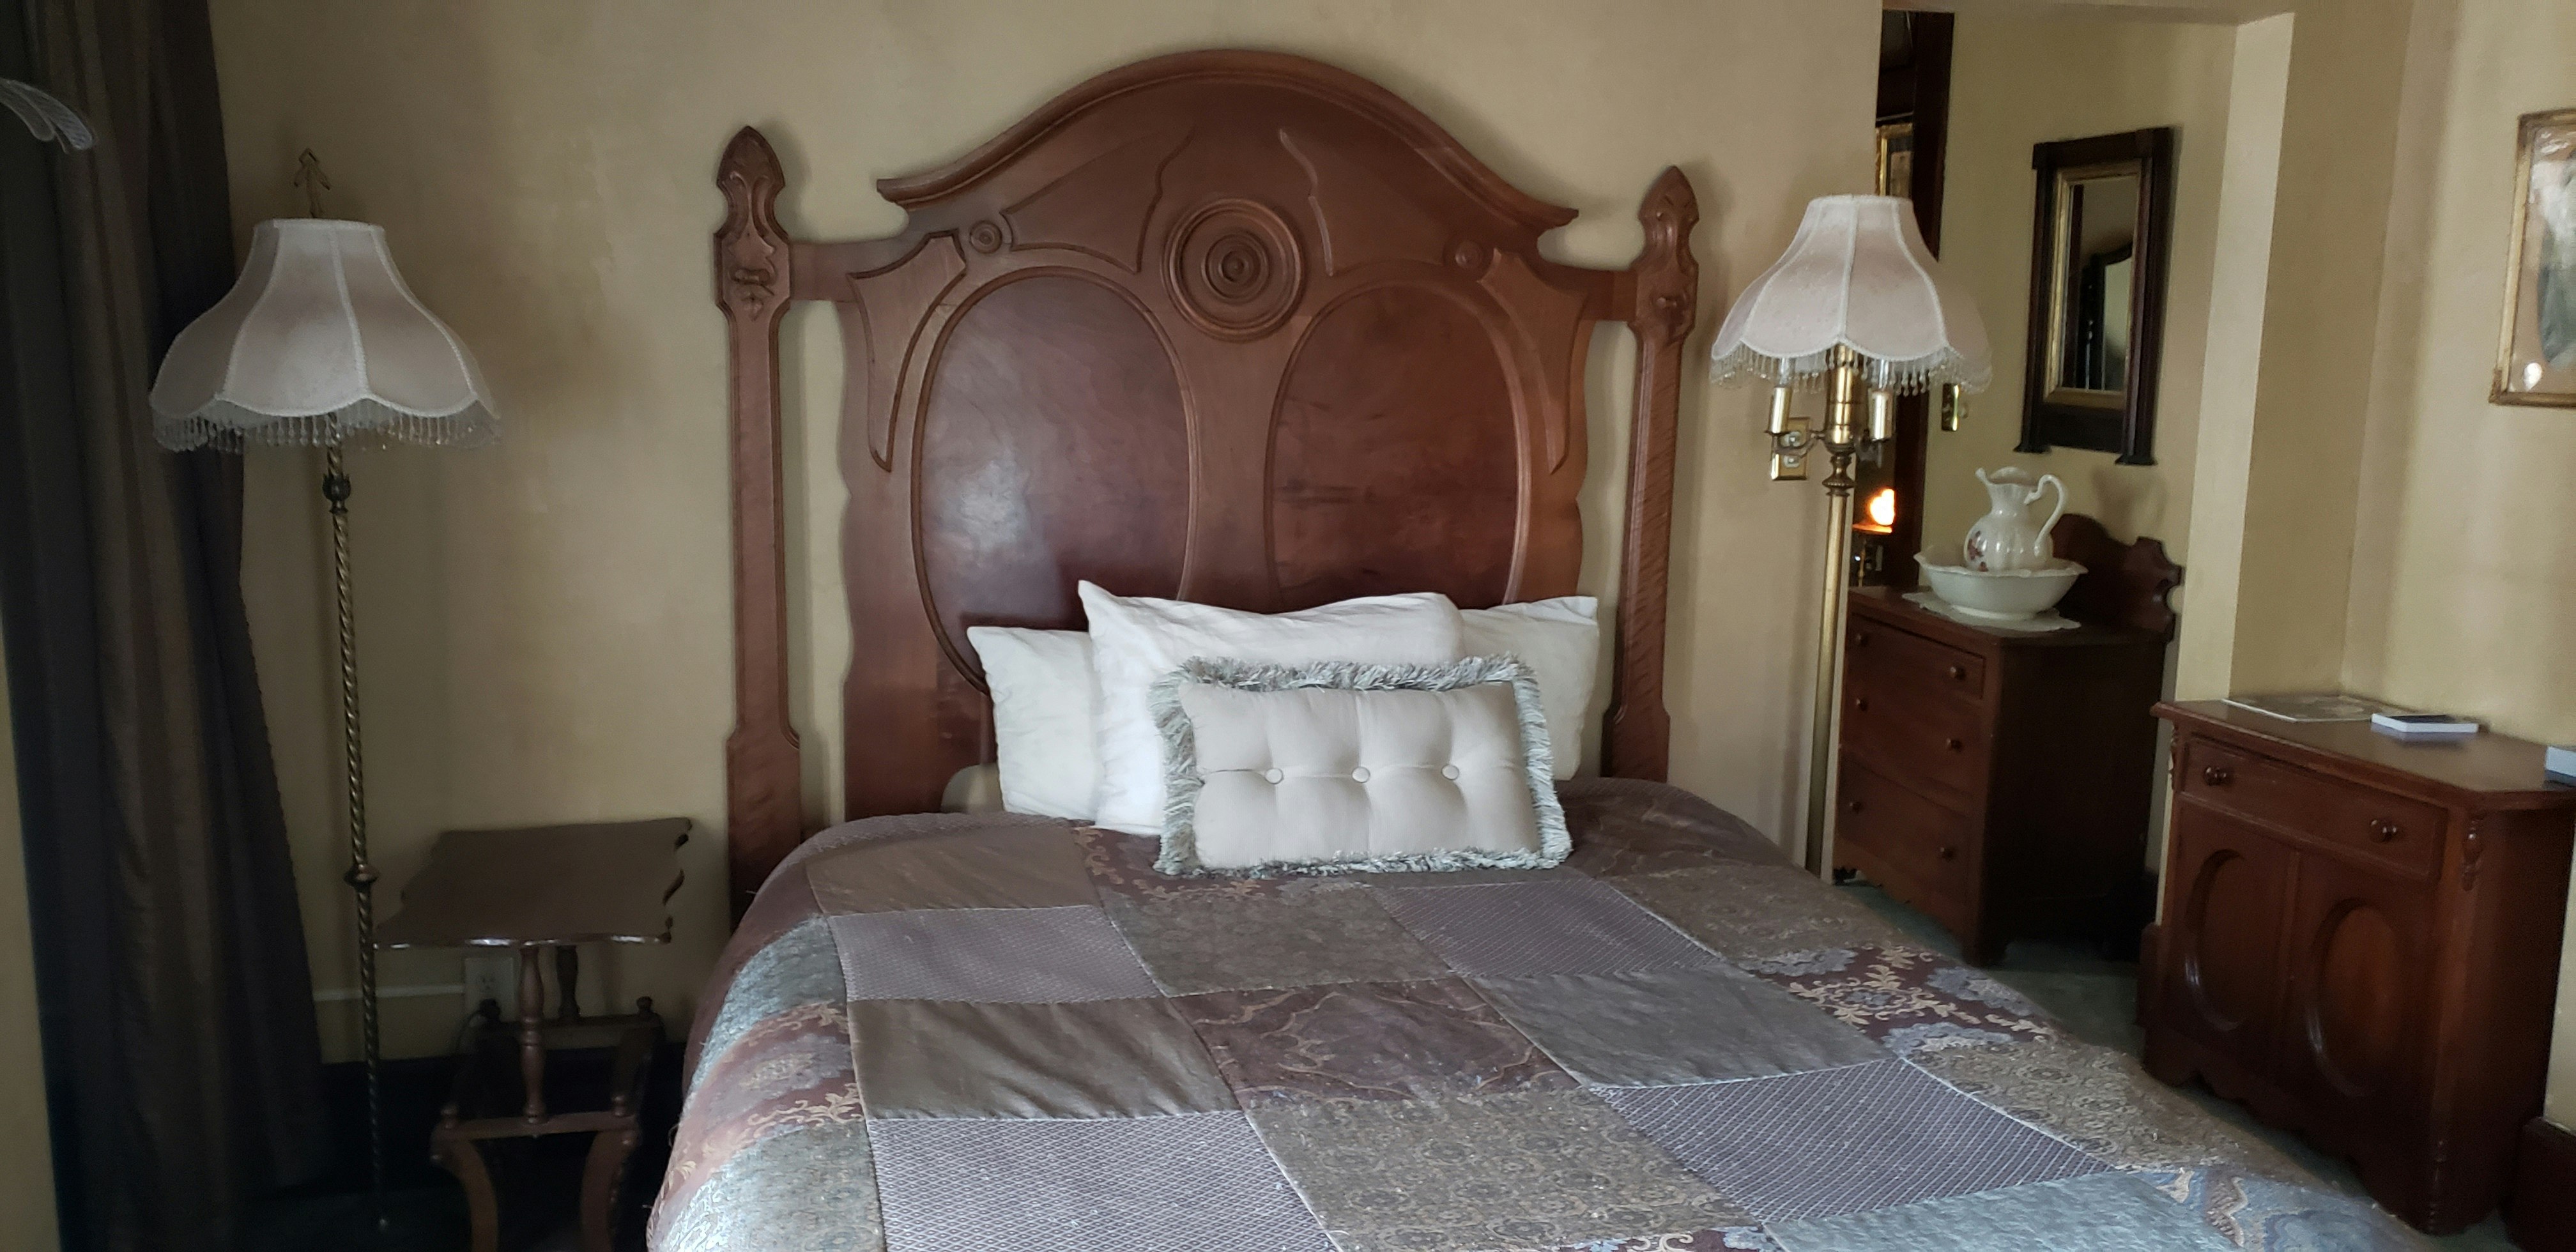 Guests in the Teddy Roosevelt Suite at the Occidental Hotel recently told the front desk clerk they felt someone sliding into the bed between them.